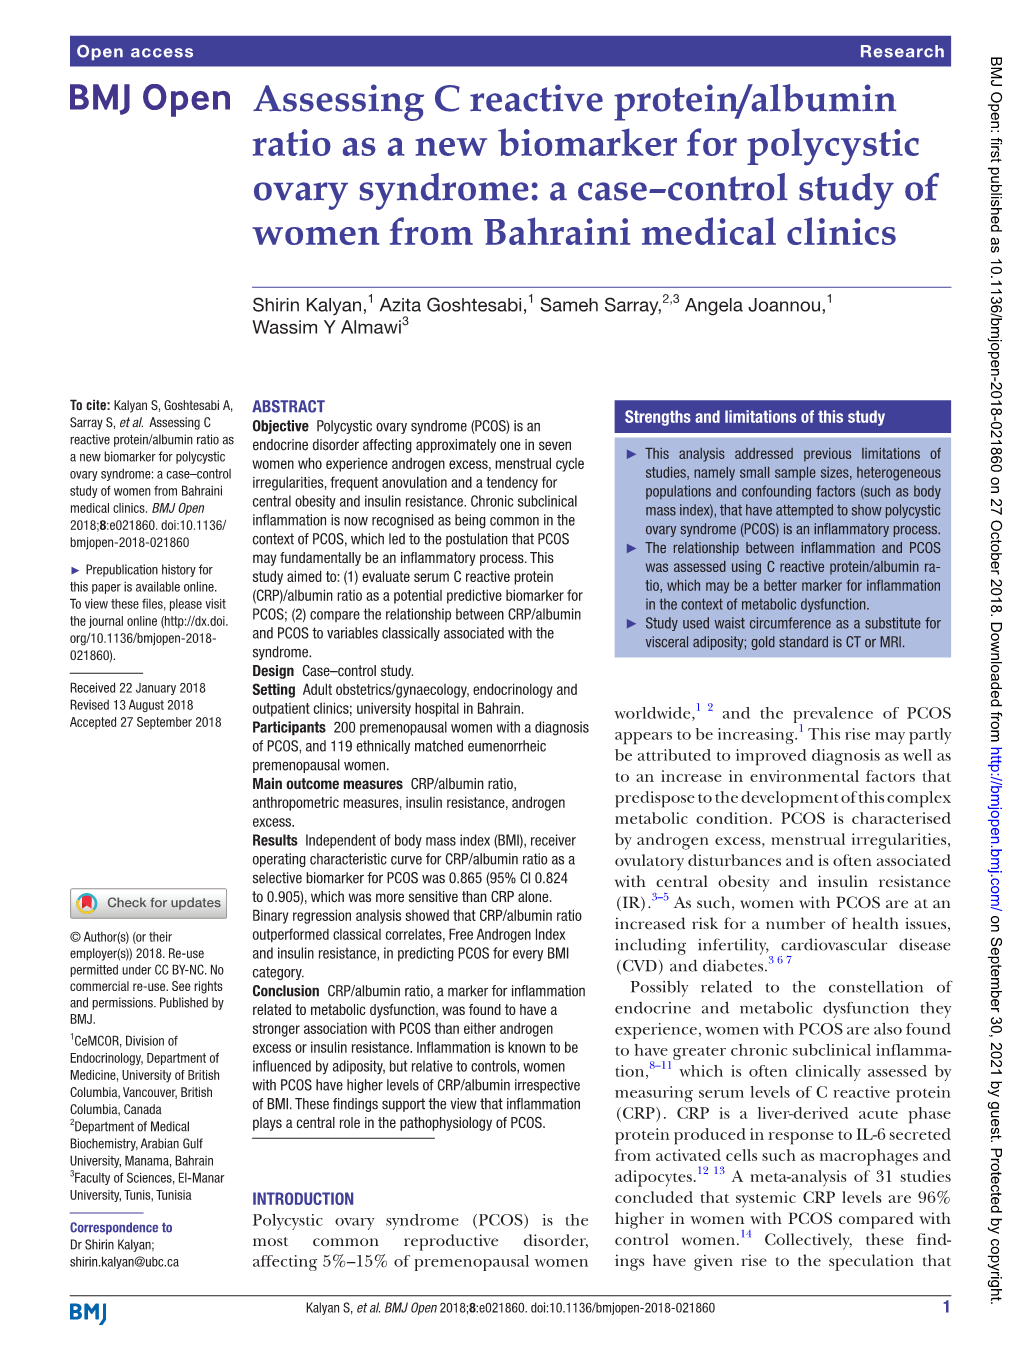 Assessing C Reactive Protein/Albumin Ratio As a New Biomarker for Polycystic Ovary Syndrome: a Case–Control Study of Women from Bahraini Medical Clinics